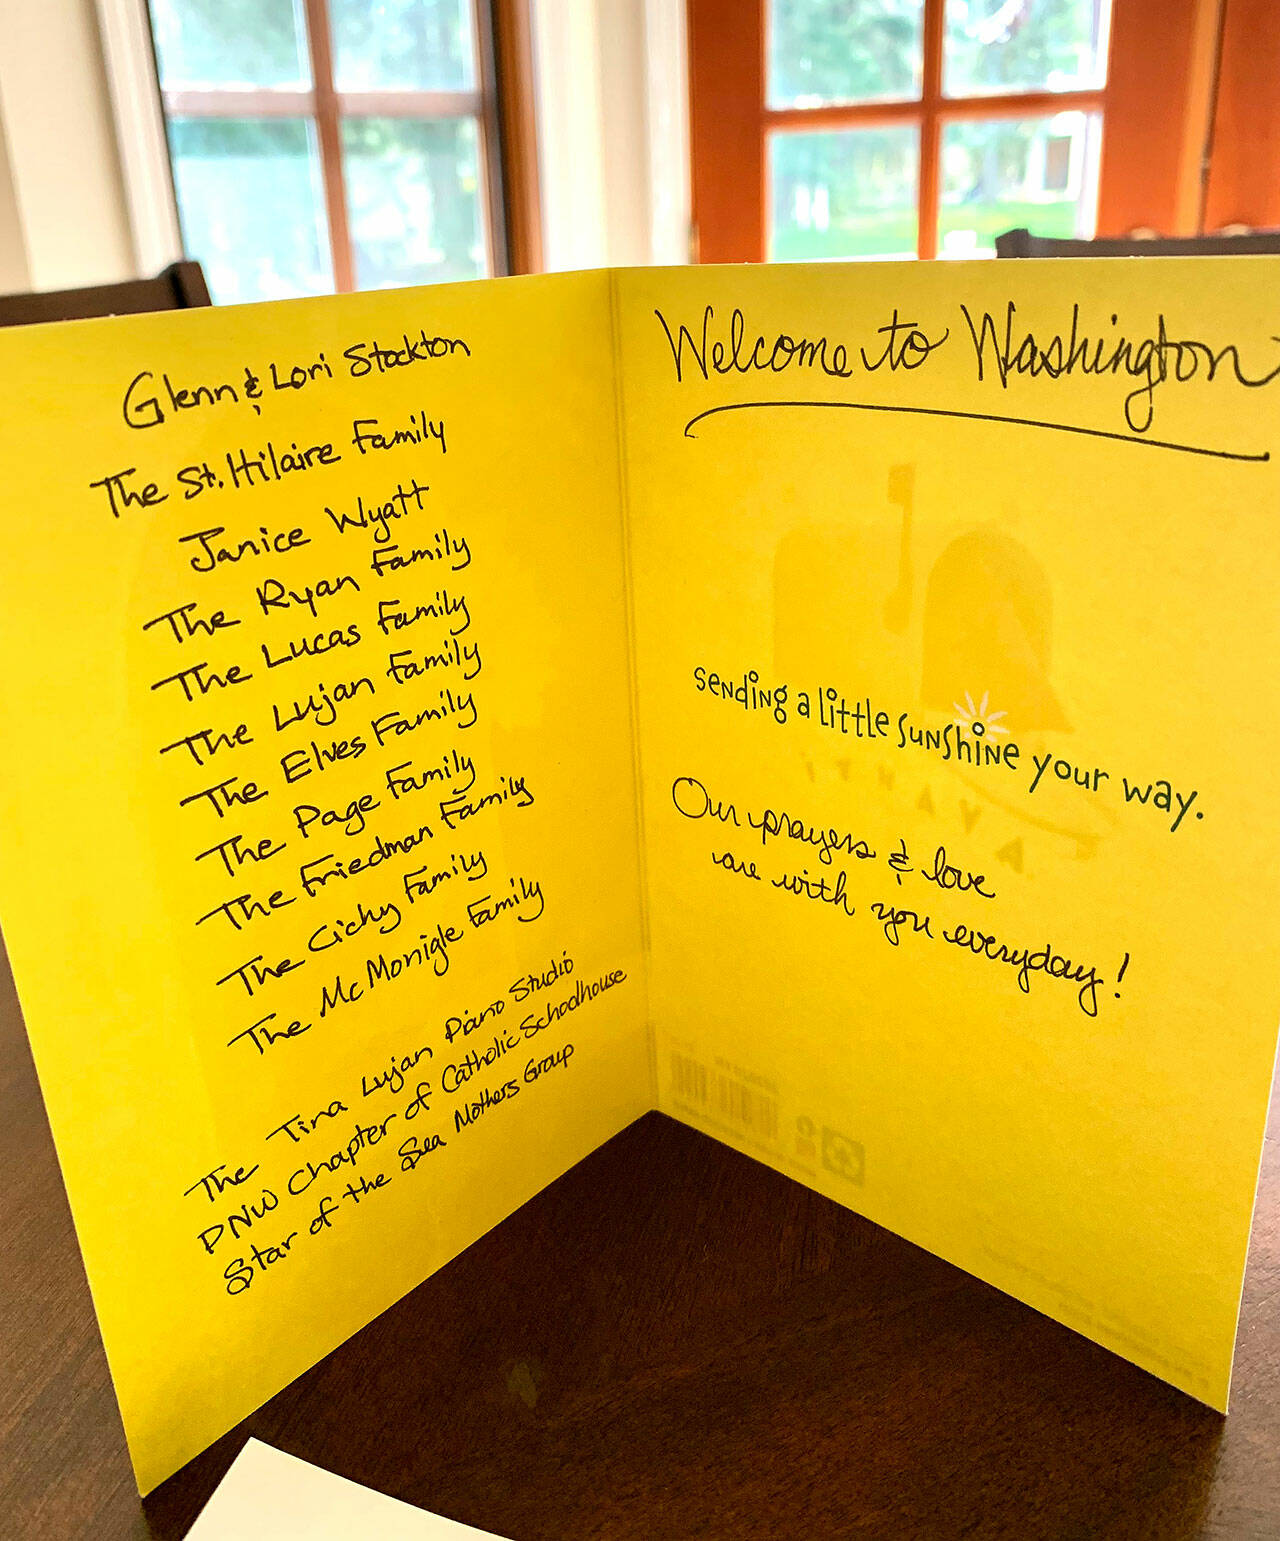 A greeting card from 10 of Alexandra Kusherets’s Southworth neighbors welcomes her sister’s family to the United States. The families generously provided bicycles, helmets, clothing, bedding and gift cards for Dasha Kusherets’s young sons as they seek to get integrated into American life. The Ukrainian family’s future is clouded, however.